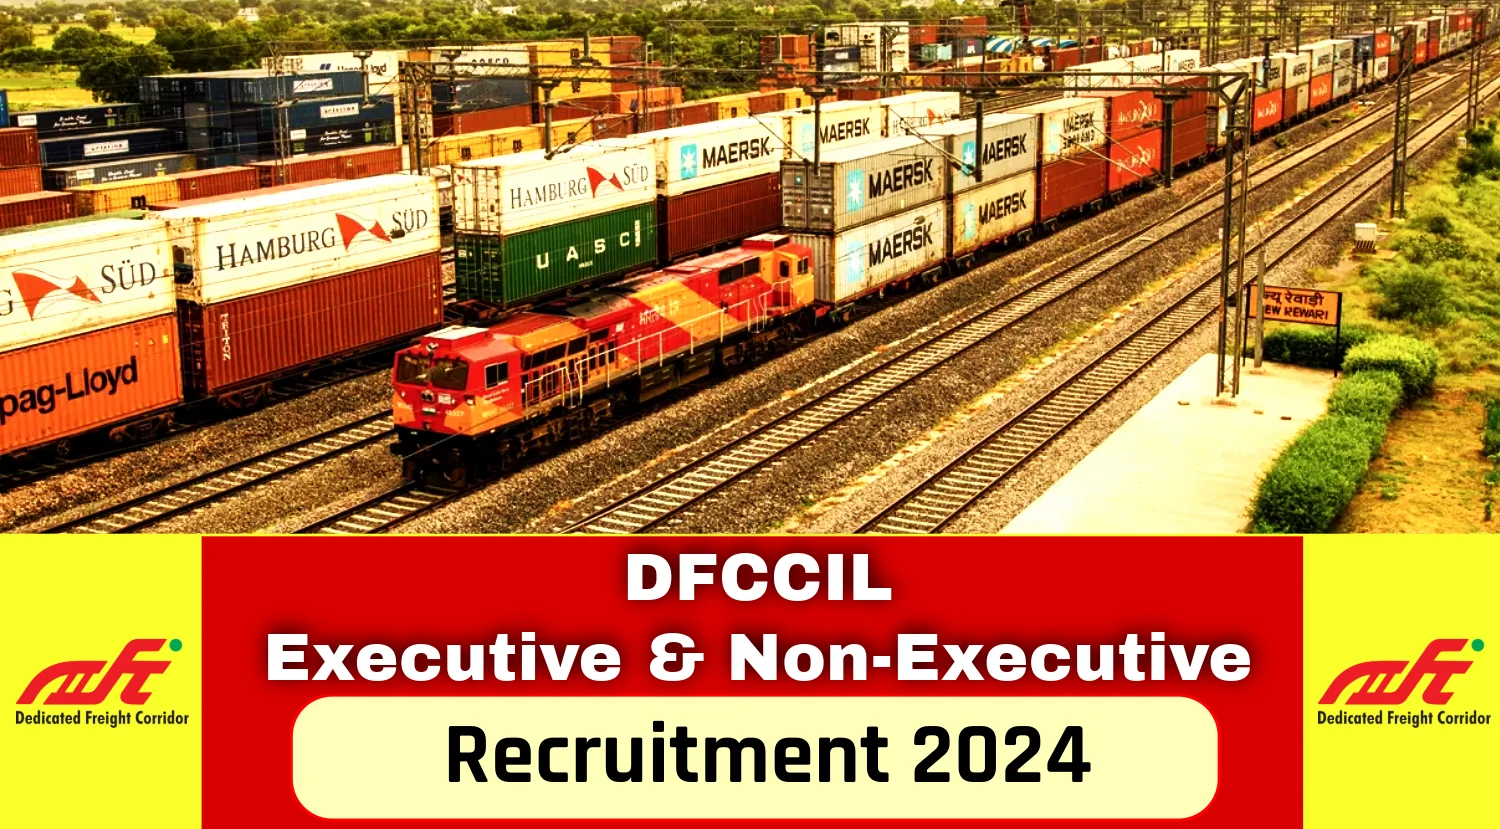 DFCCIL Recruitment 2024 Notification 2024 for Various Executive and Jr Executive Posts, Check Details Now